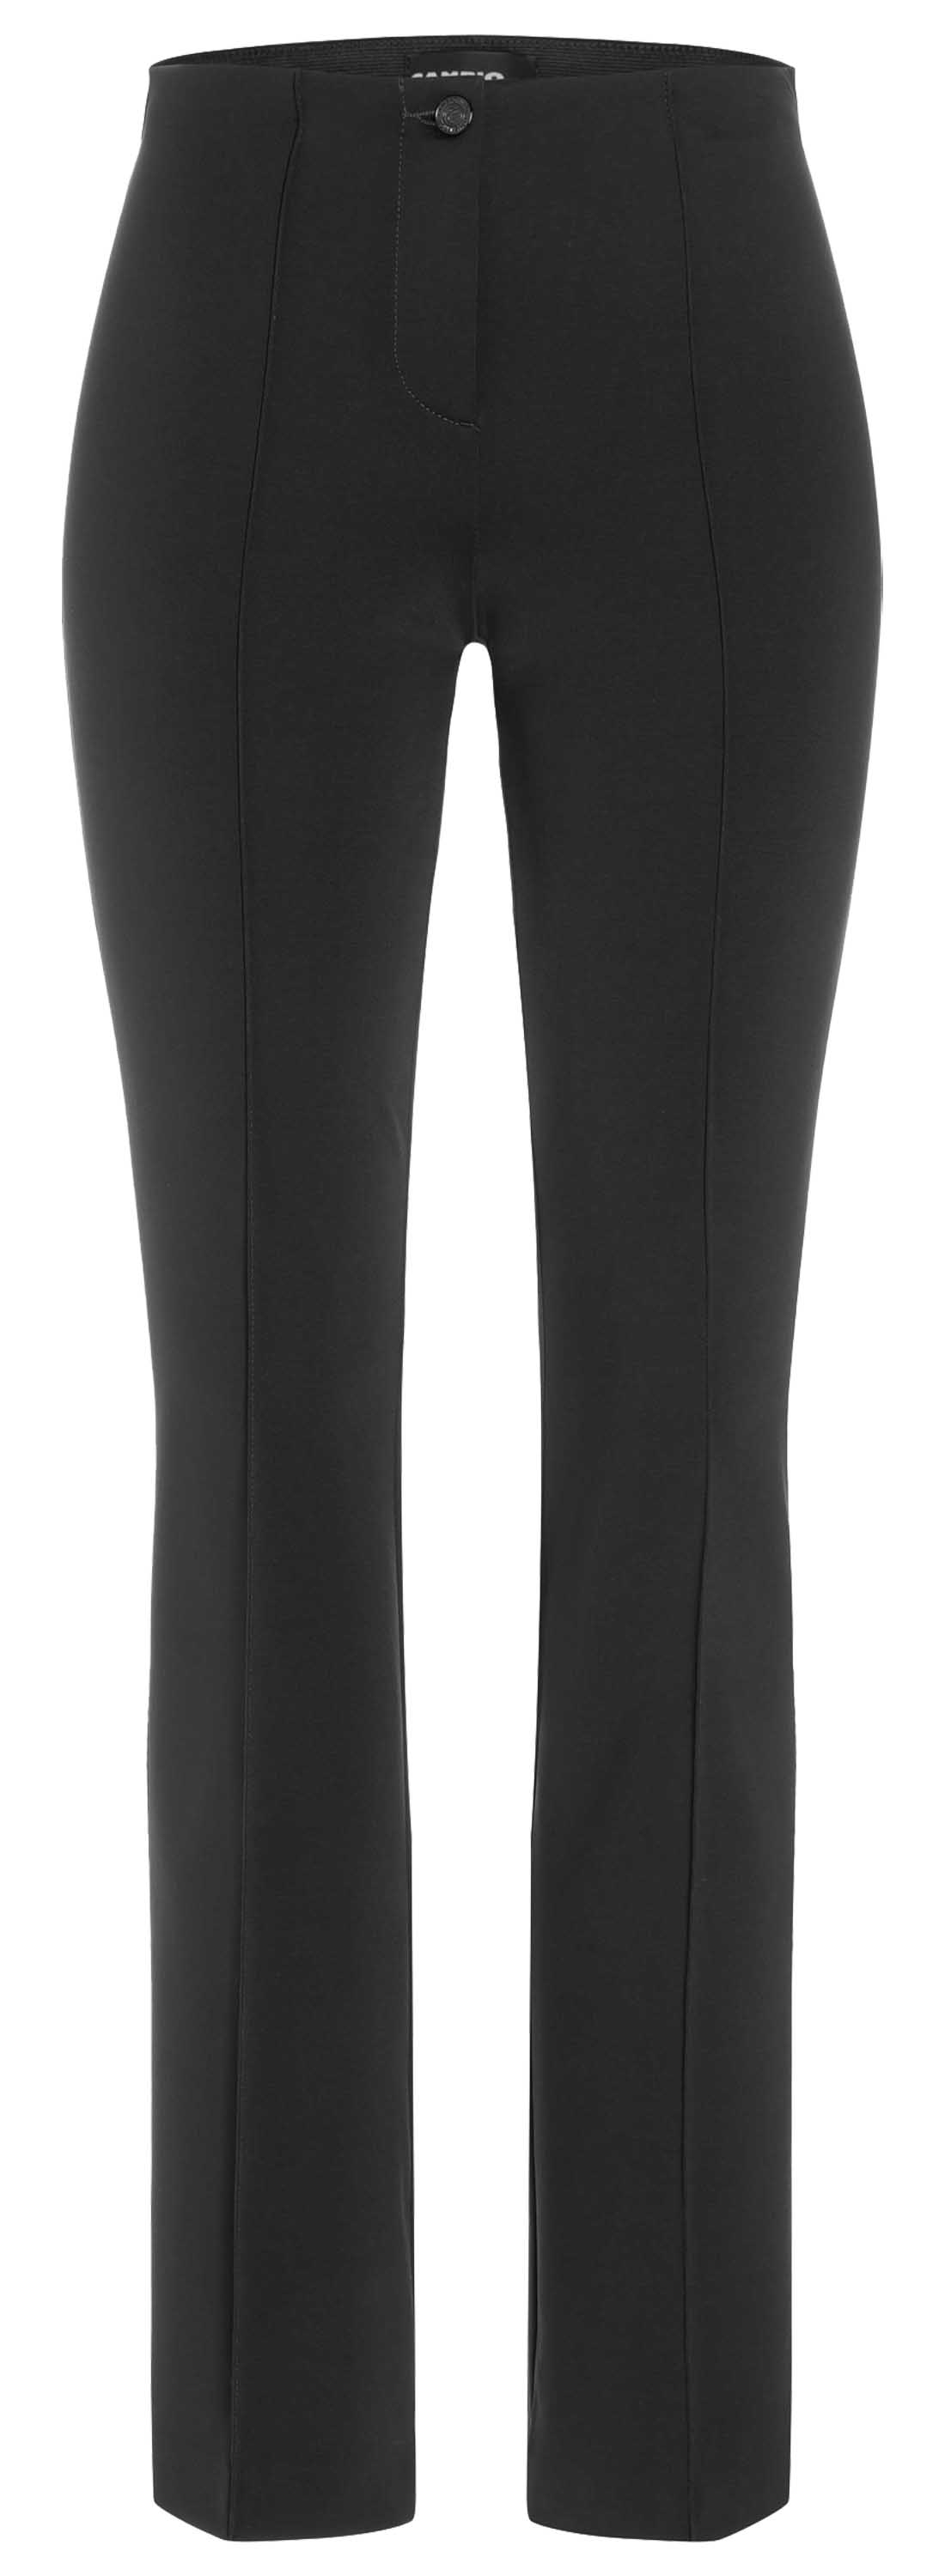 trousers ROS 6323-0350-01 by Penninkhoffashion.com